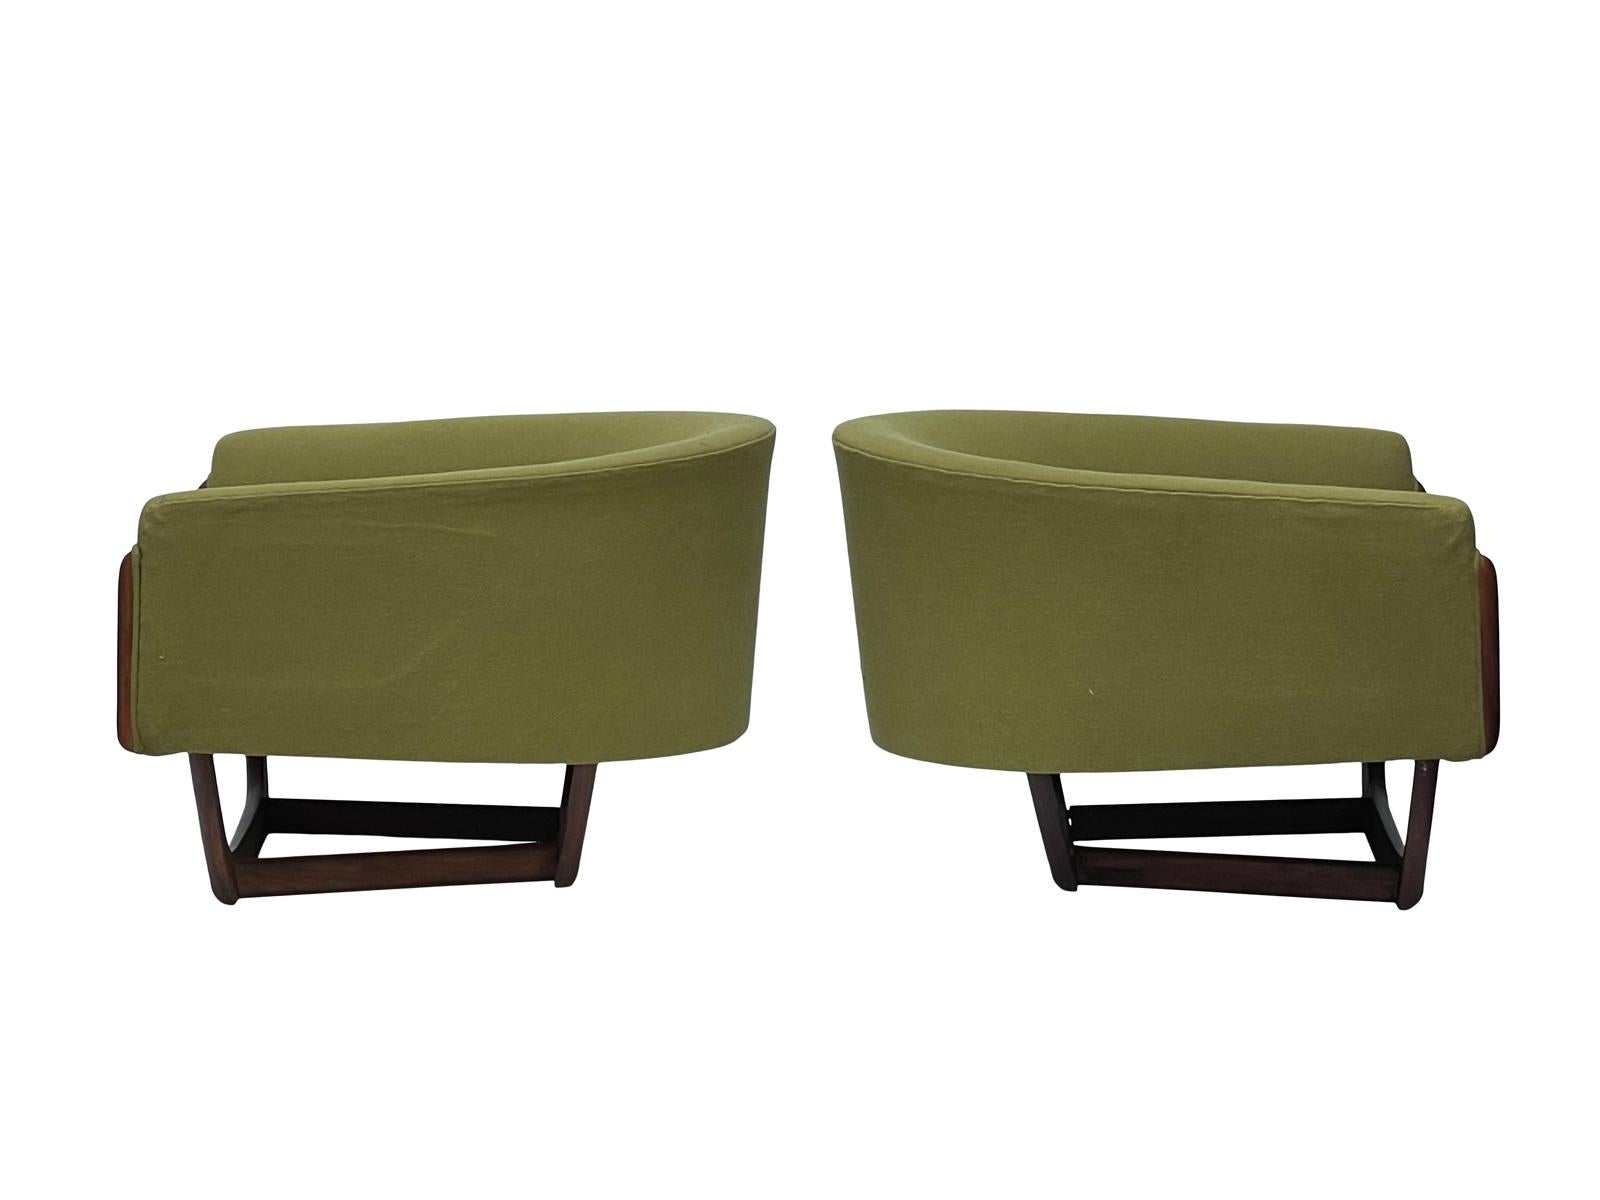 American 1960s Adrian Pearsall Craft Associates 2832-C Lounge Chair A Pair For Sale